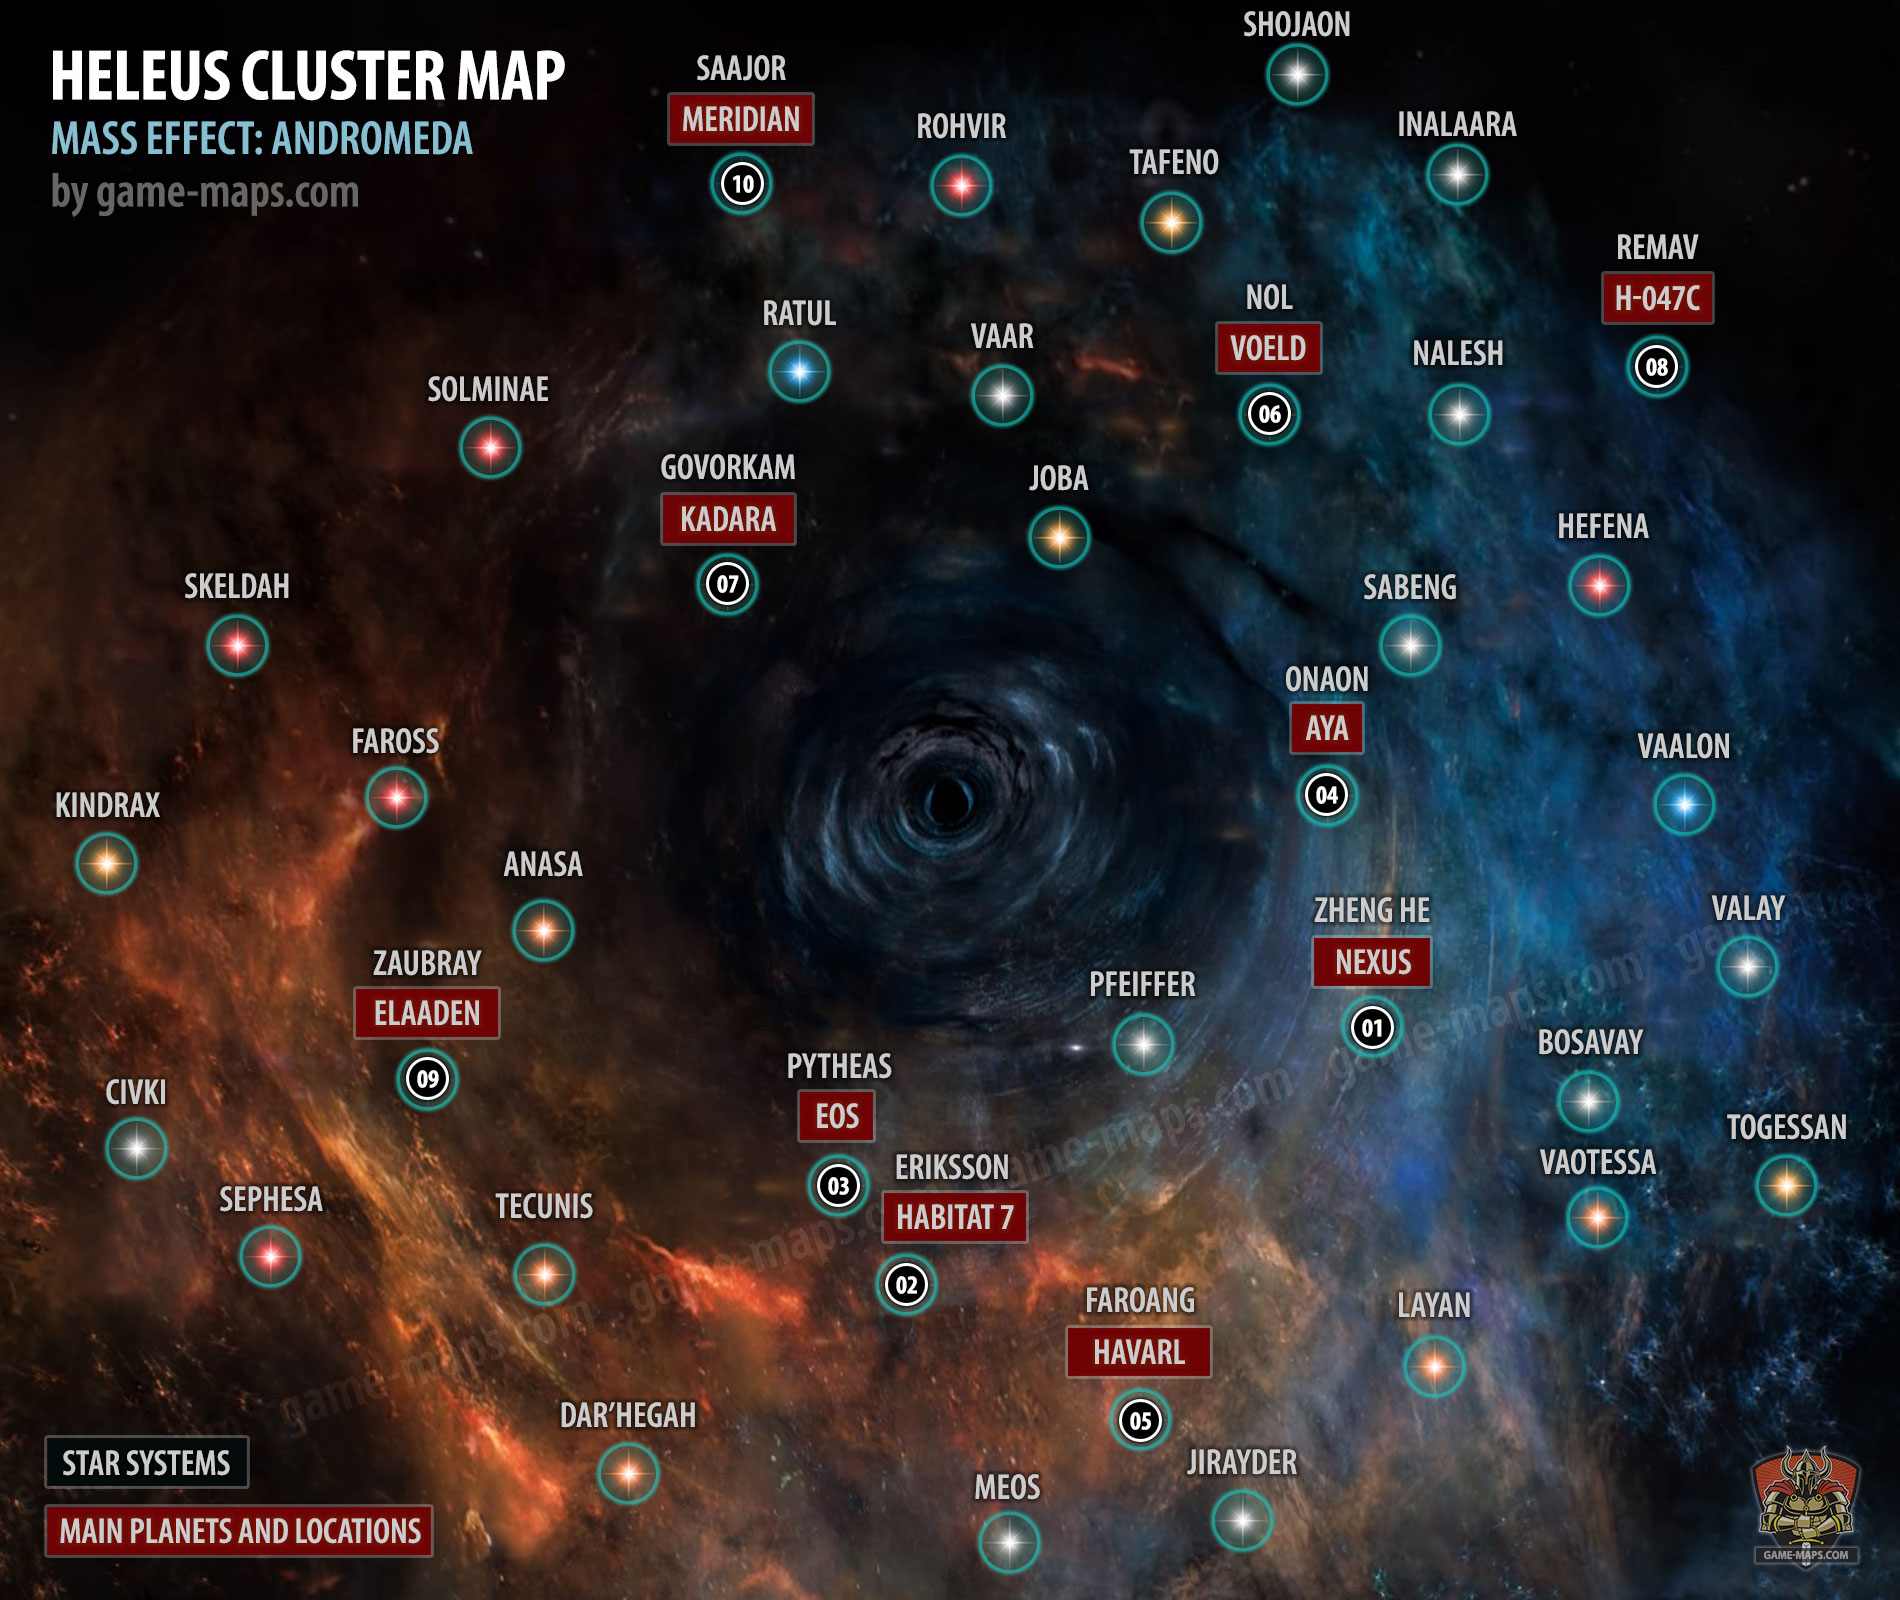 Heleus Cluster Map for Mass Effect Andromeda